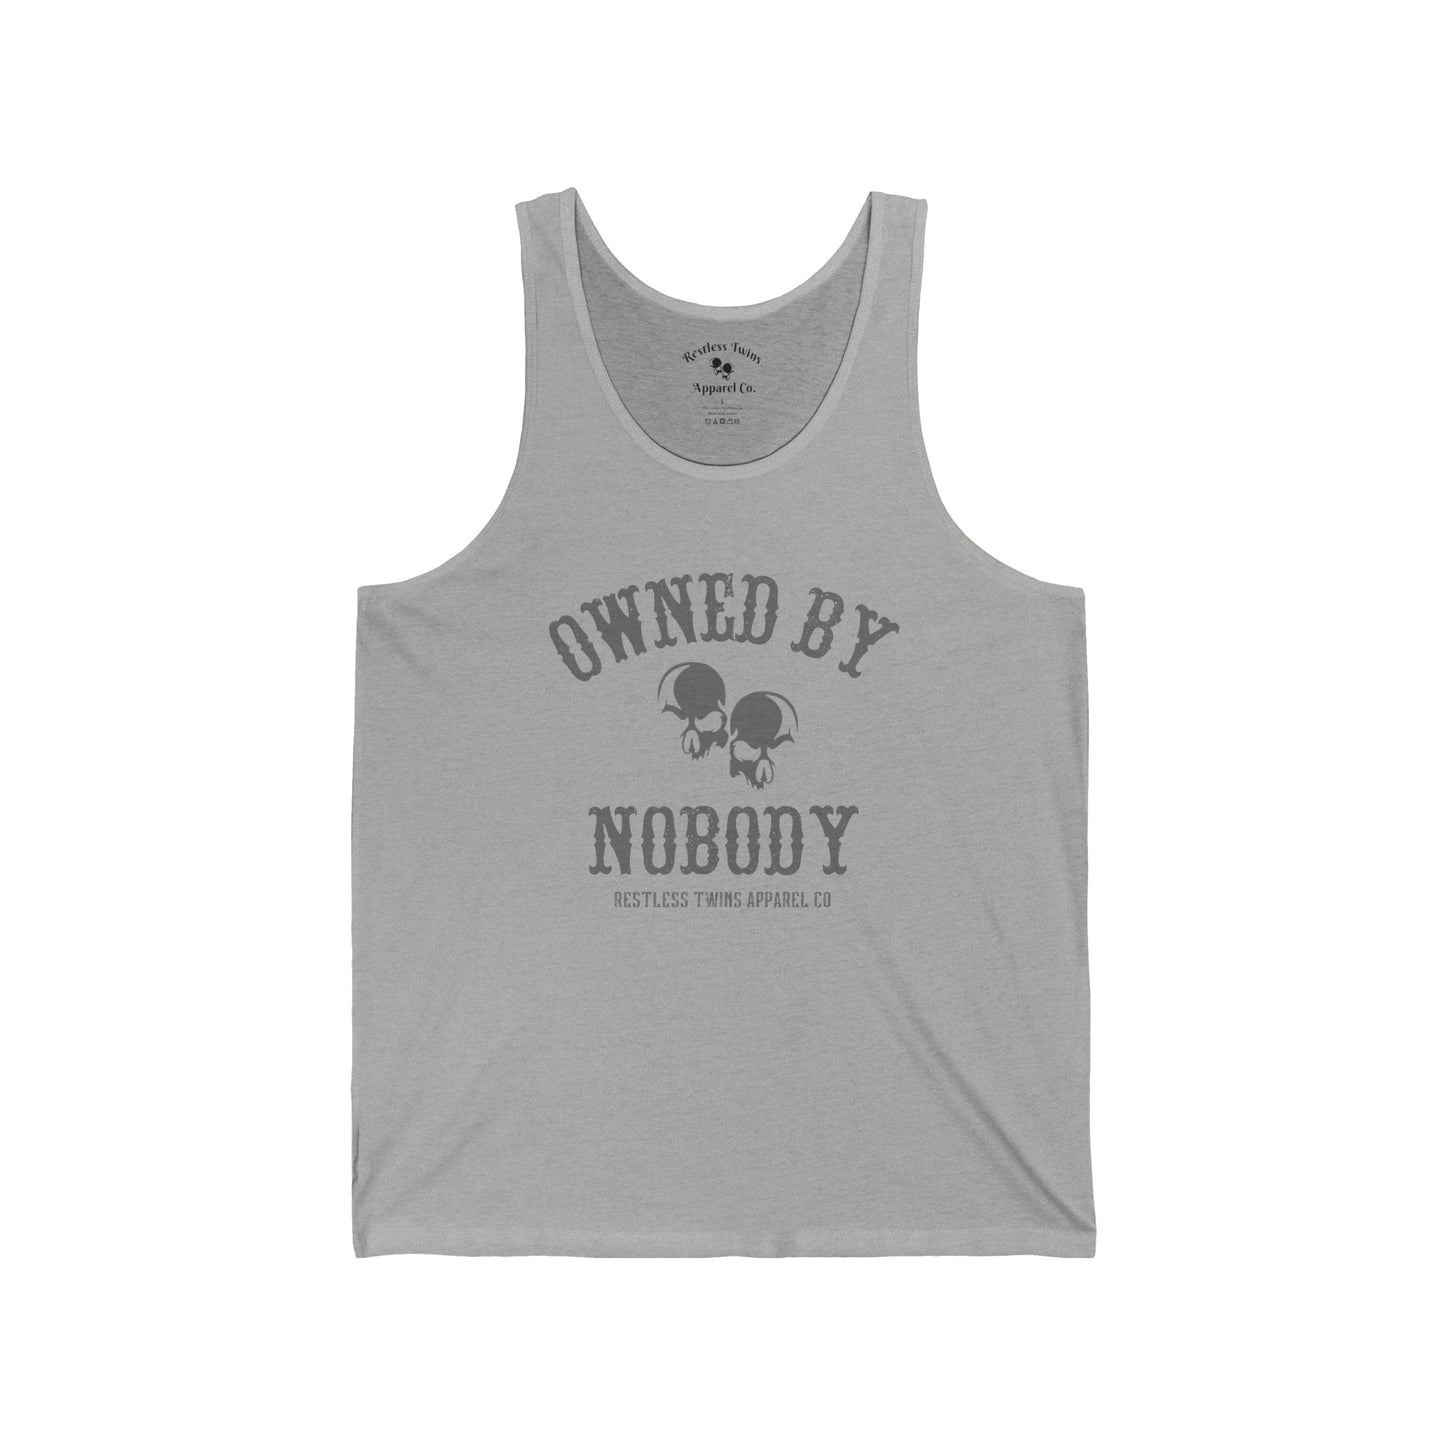 Owned by Nobody Men's Tank Top